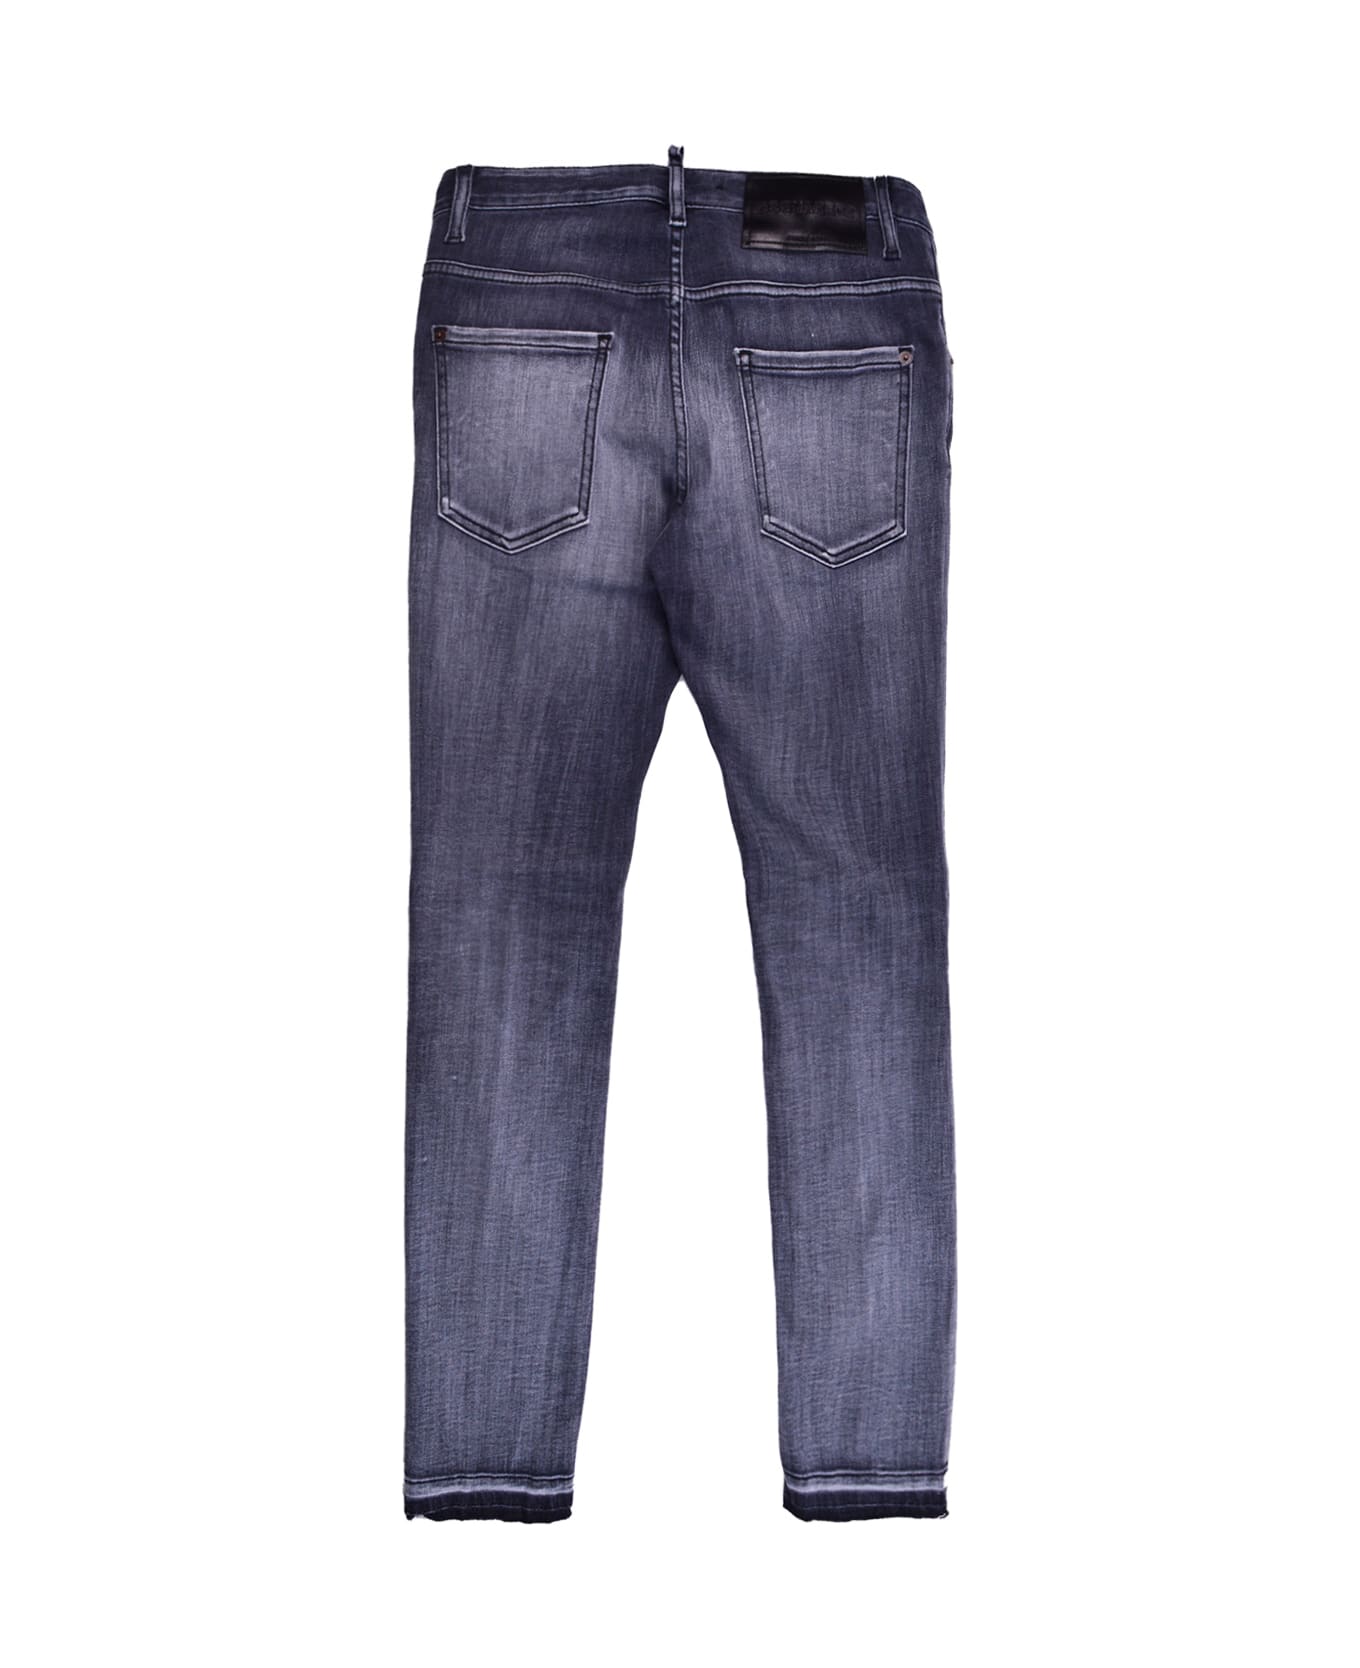 Dsquared2 Jeans - Grey